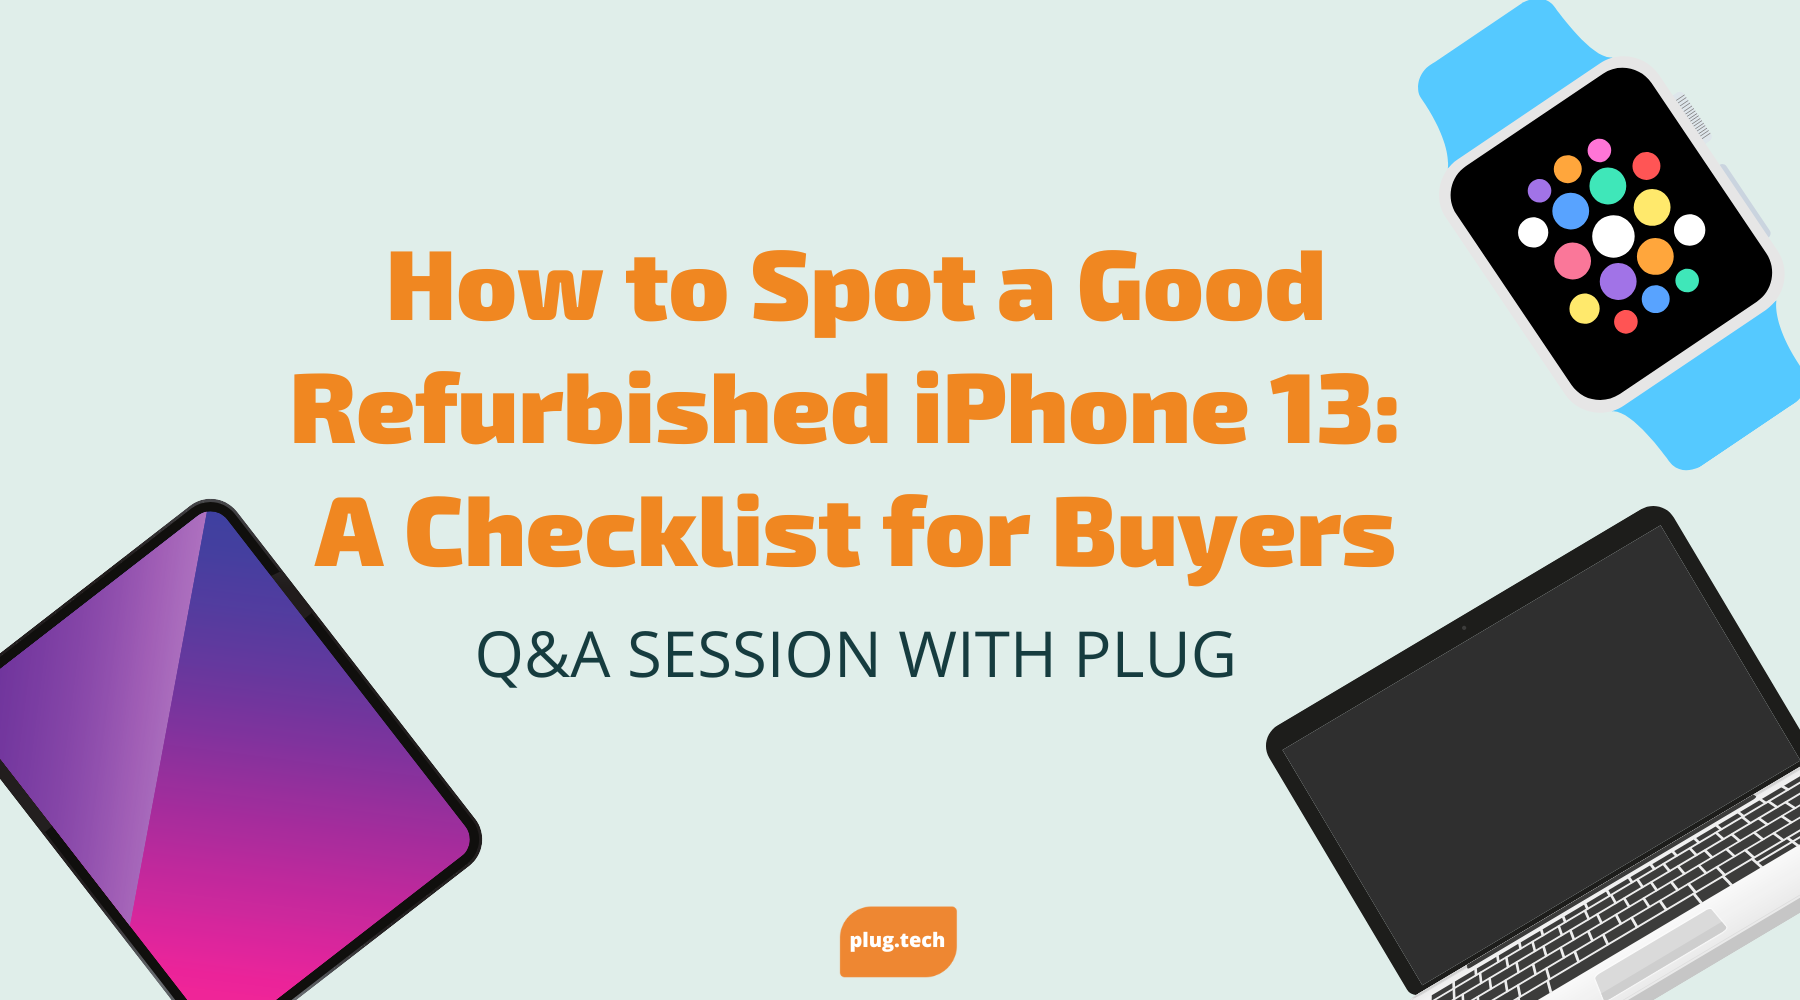 How to Spot a Good Refurbished iPhone 13: A Checklist for Buyers